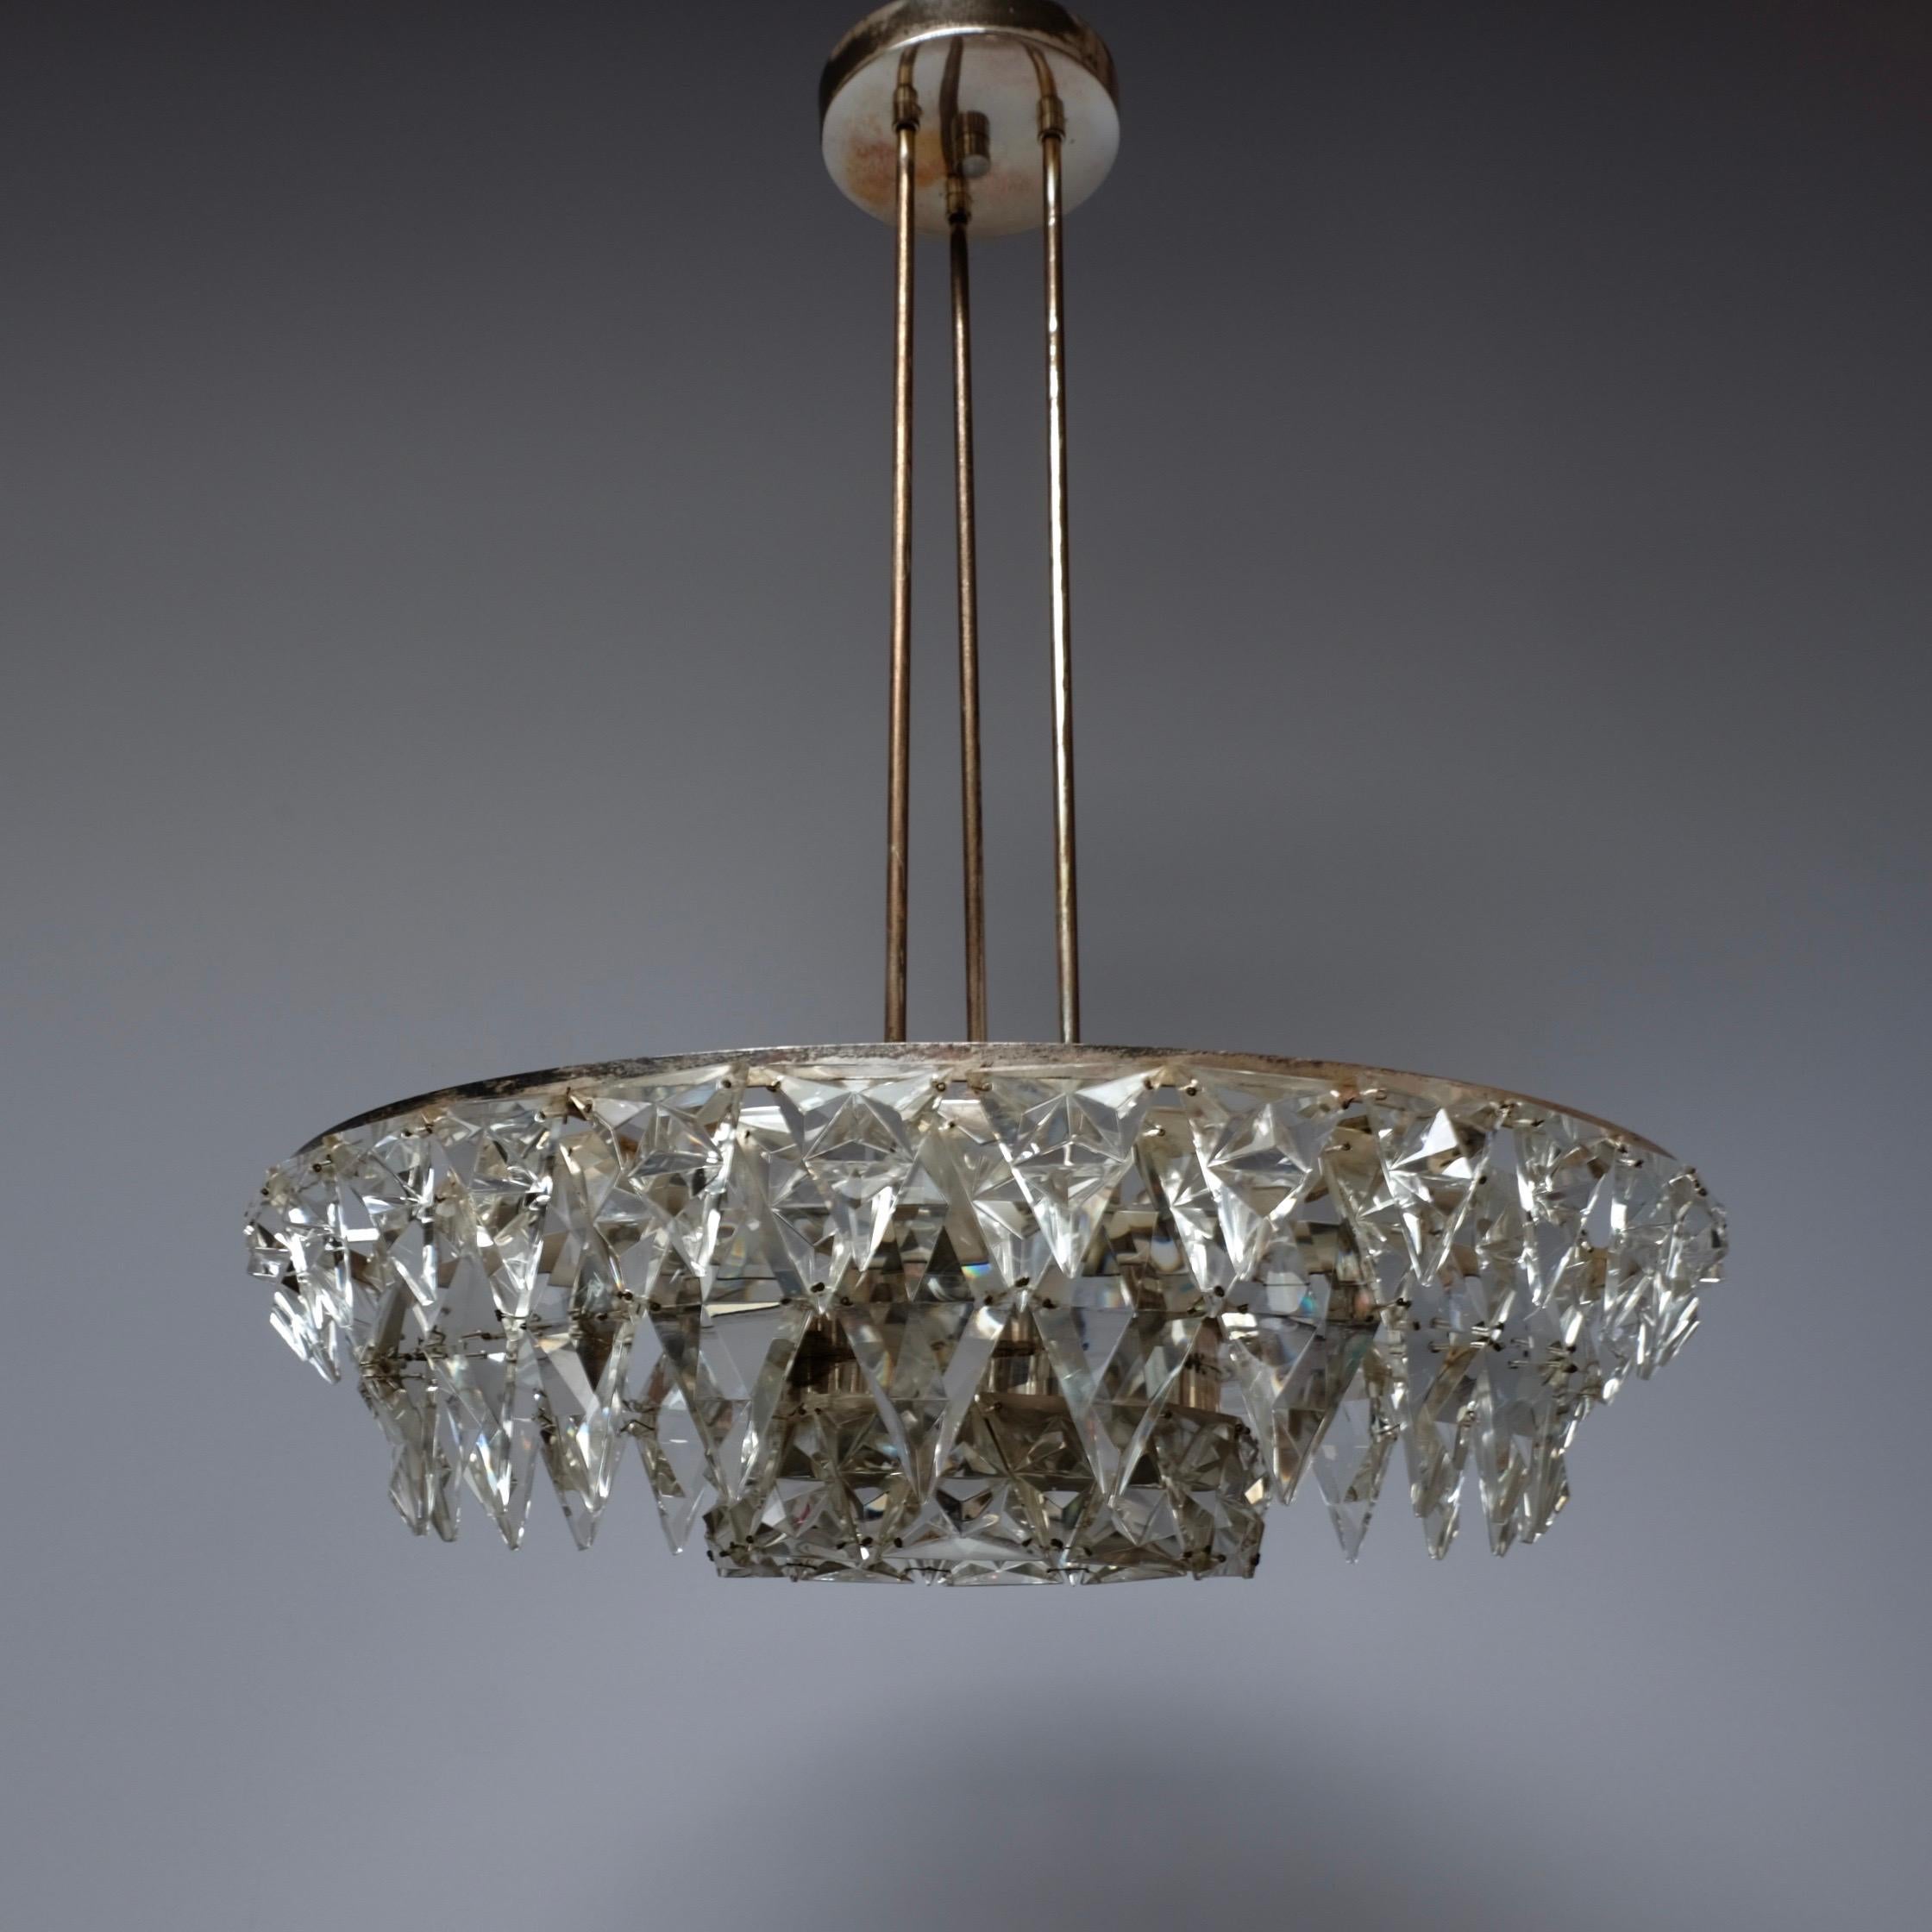 A rare and stunning silver brass plated and cut crystal glass icicle chandelier. Manufactured by Kinkeldey in Germany during the 1960s. The chandelier is suspended from three slim rods which attach to a circular ceiling rose. Two circular tiers of